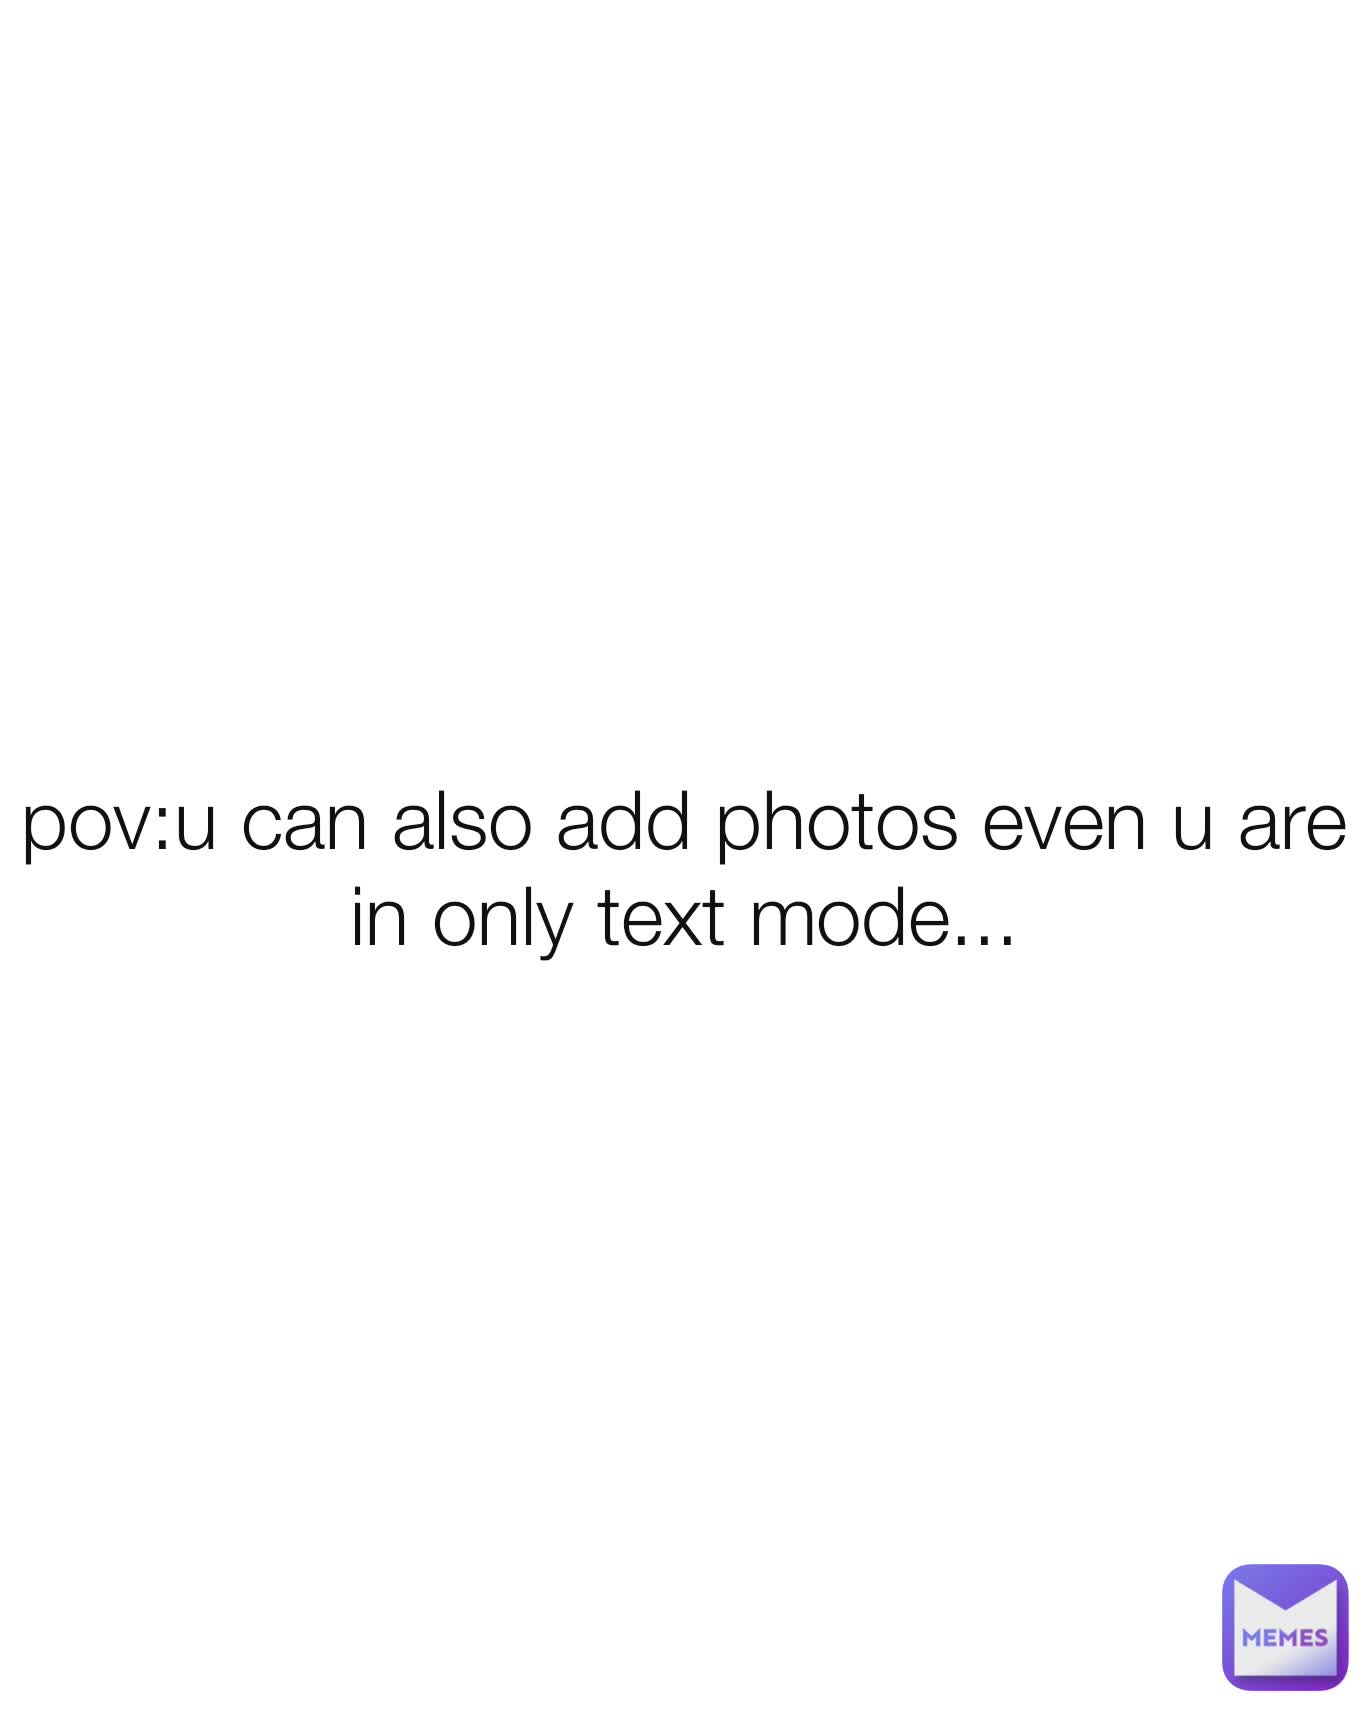 pov:u can also add photos even u are in only text mode...